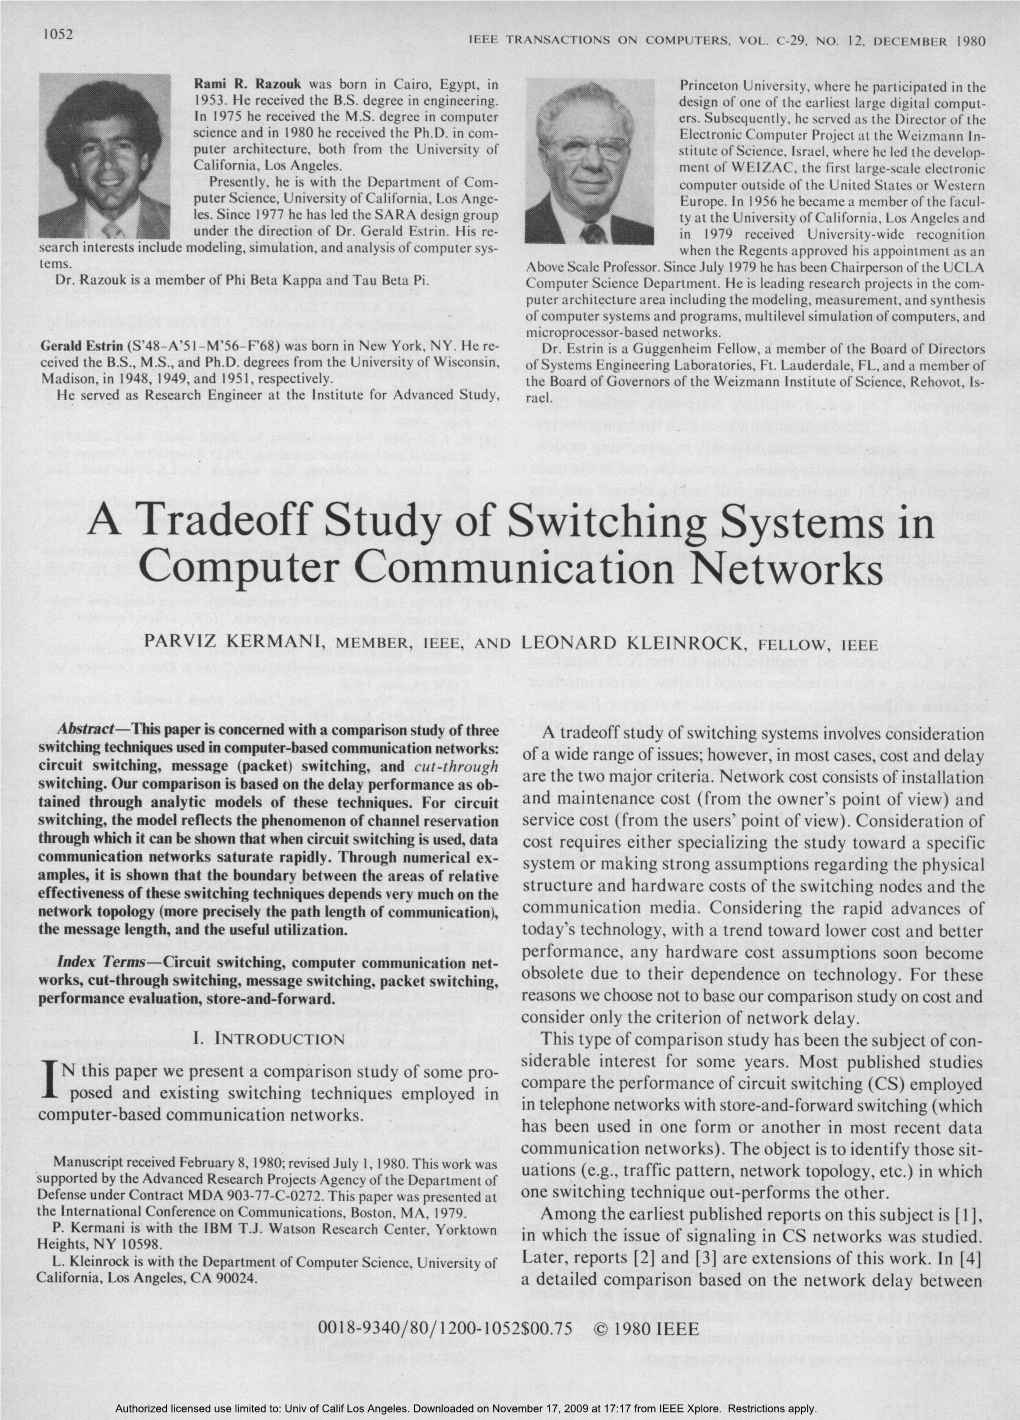 A Tradeoff Study of Switching Systems in Computer Communication Networks